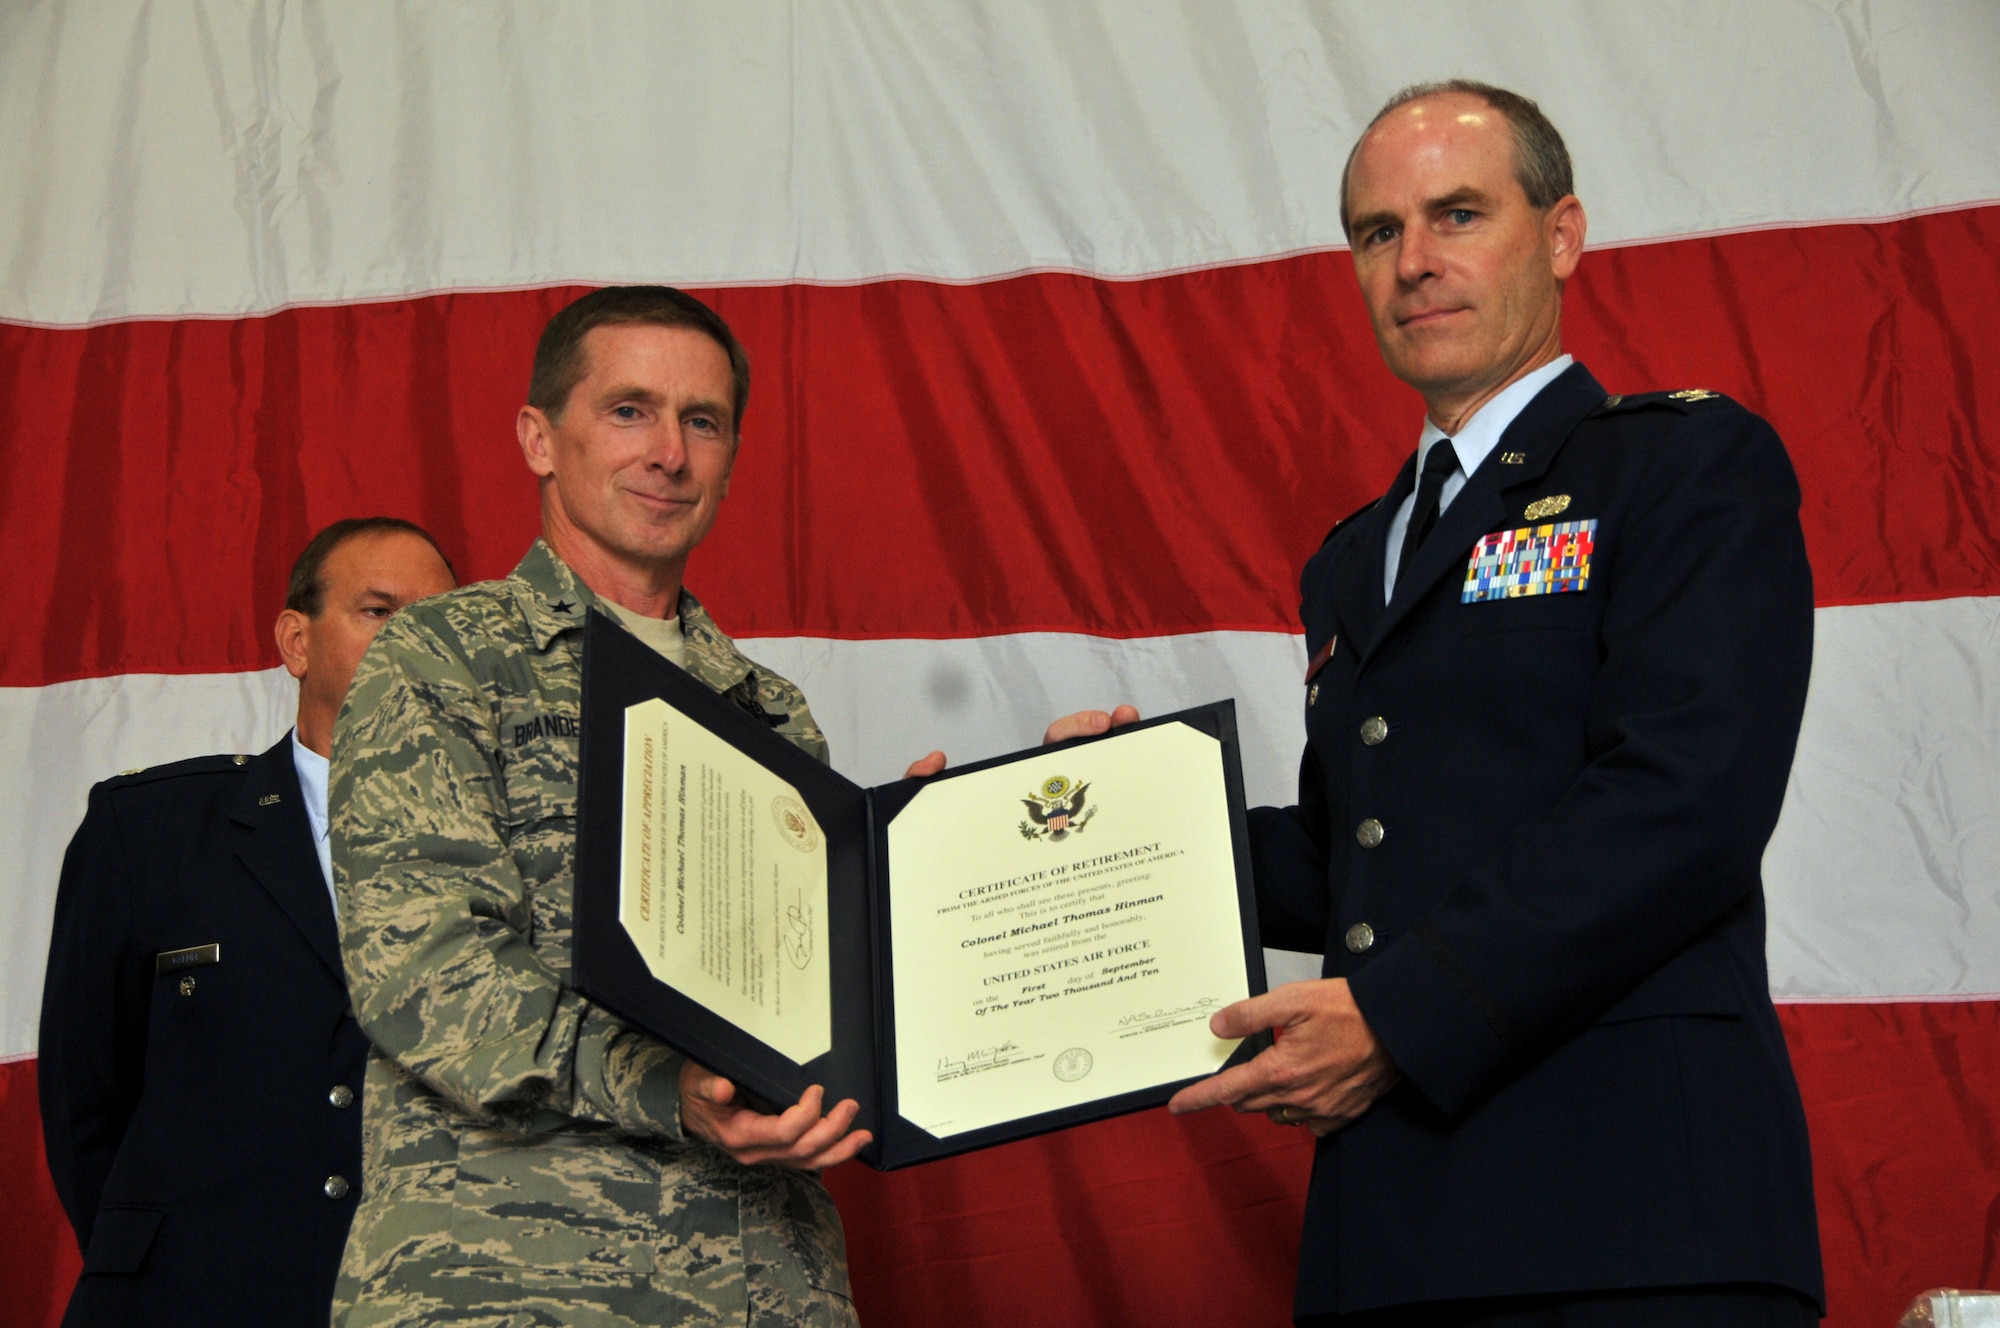 Brigadier General Joseph Brandemuehl, 115th Fighter Wing commander, presents Colonel Michael Hinman his certificate of retirement as he completes a 34 year military career.  As a member of the 115th Fighter Wing, Colonel Hinman served most recently as the vice commander of the wing in Madison. In June, Colonel Hinman was appointed by Governor Jim Doyle as the administrator of Wisconsin Emergency Management. (U.S. Air Force photo by Tech. Sgt. Don Nelson)